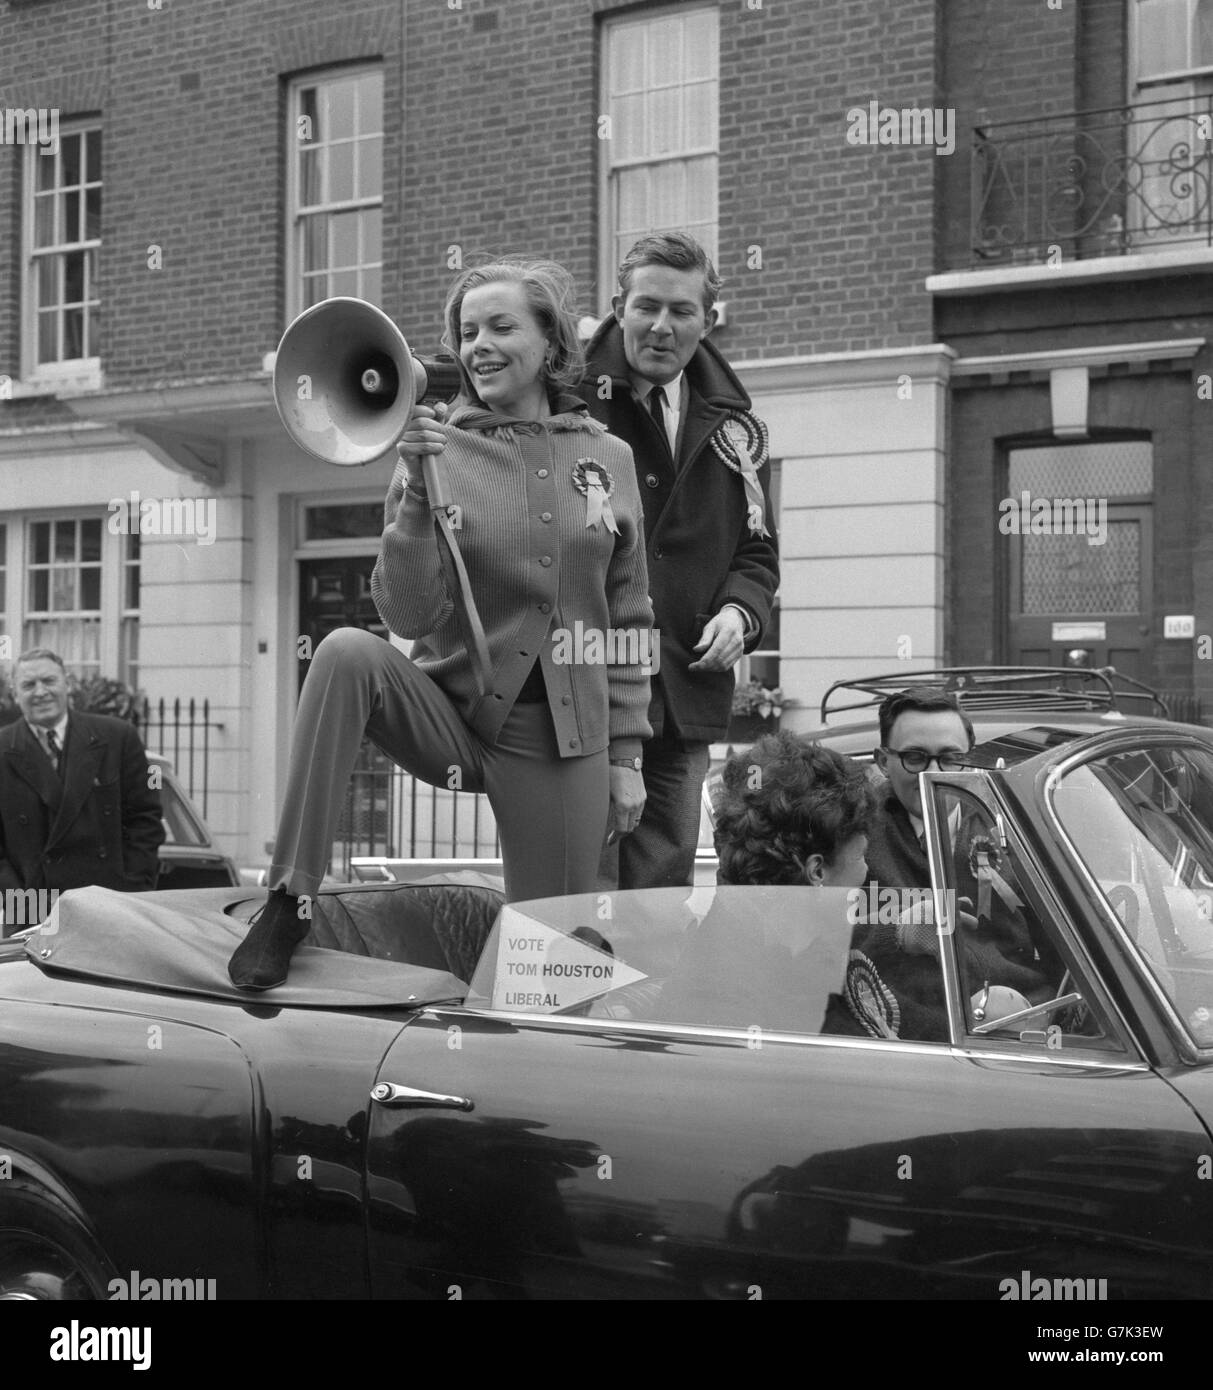 Wearing a rosette, actress Honor Blackman - one-time Cathy Gale of The Avengers - takes up the loud hailer in support of Tom Houston, Liberal candidate for the Cities of London and Westminster in the General Election. Miss Blackman is with Houston when she joined a motorcade that toured the constituency as part of his election campaign. Stock Photo